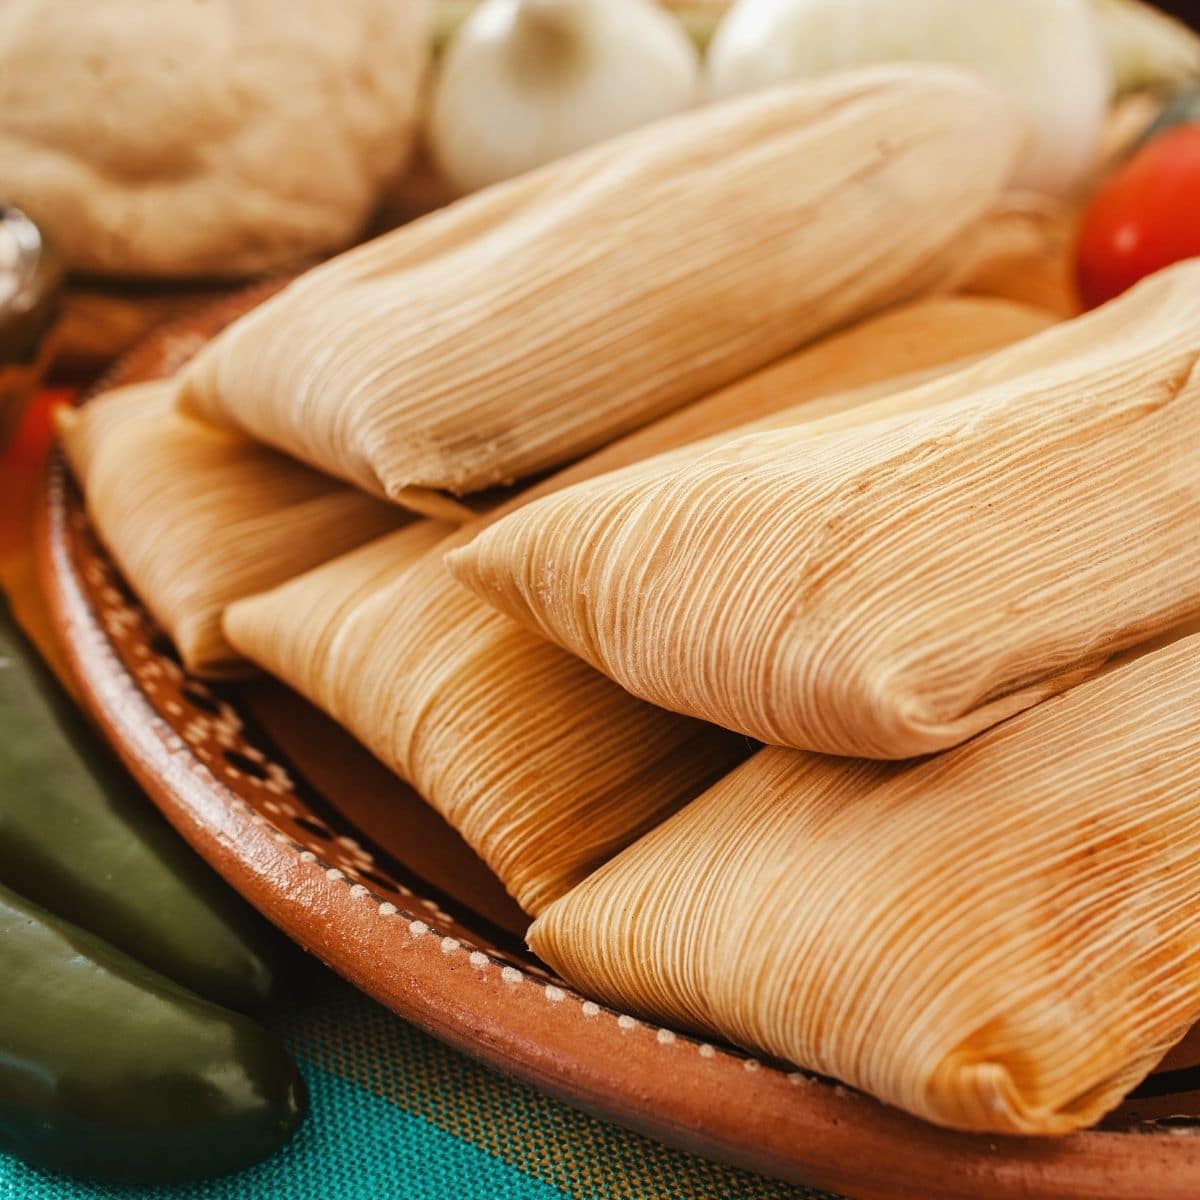 Square image of a plate full of tamales.